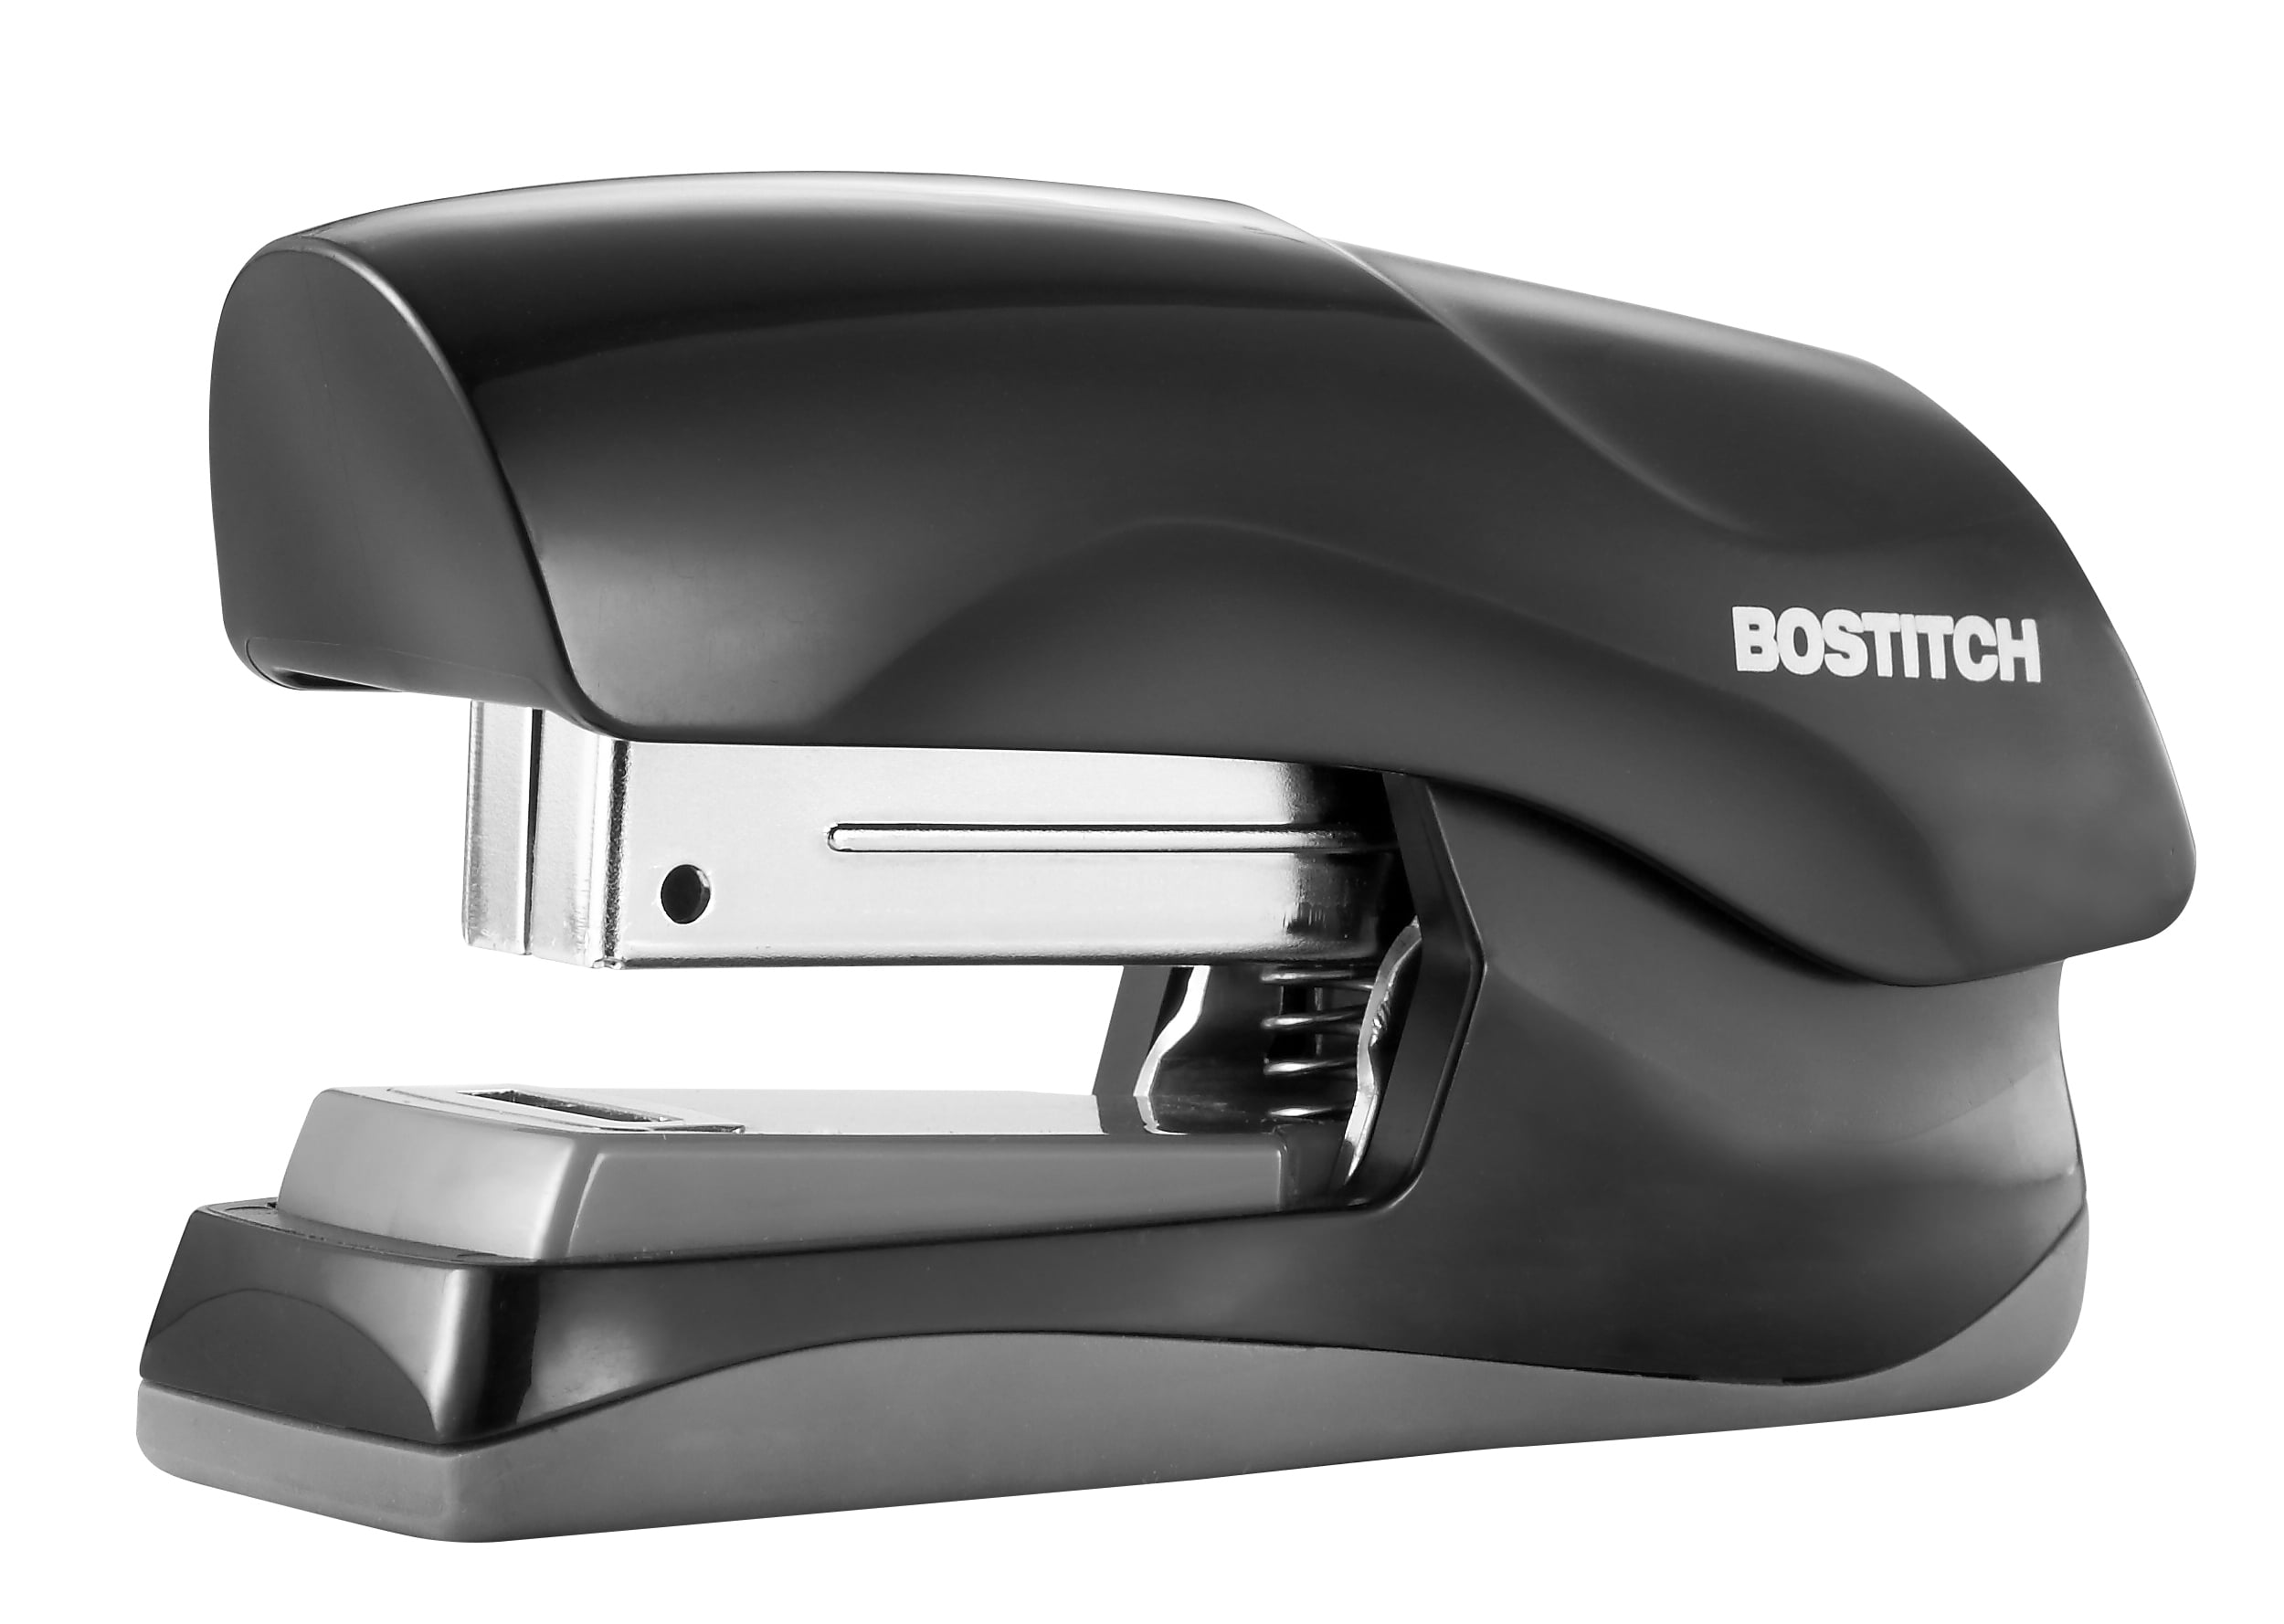 Small Stapler Size B175-BLK Bostitch Office Heavy Duty 40 Sheet Stapler - 2 Pack Fits into The Palm of Your Hand; Black 